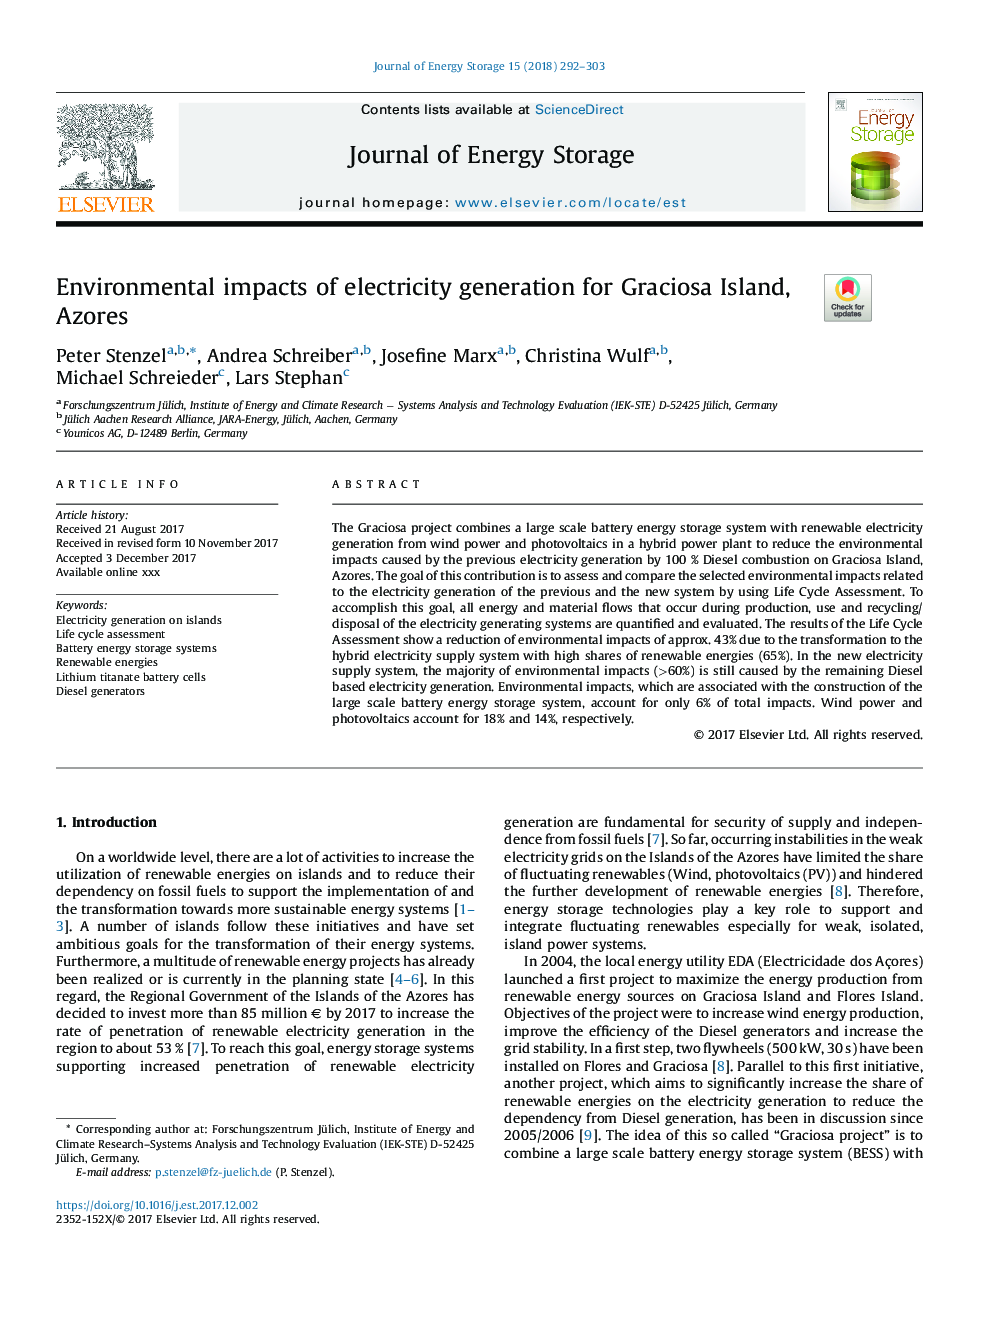 Environmental impacts of electricity generation for Graciosa Island, Azores